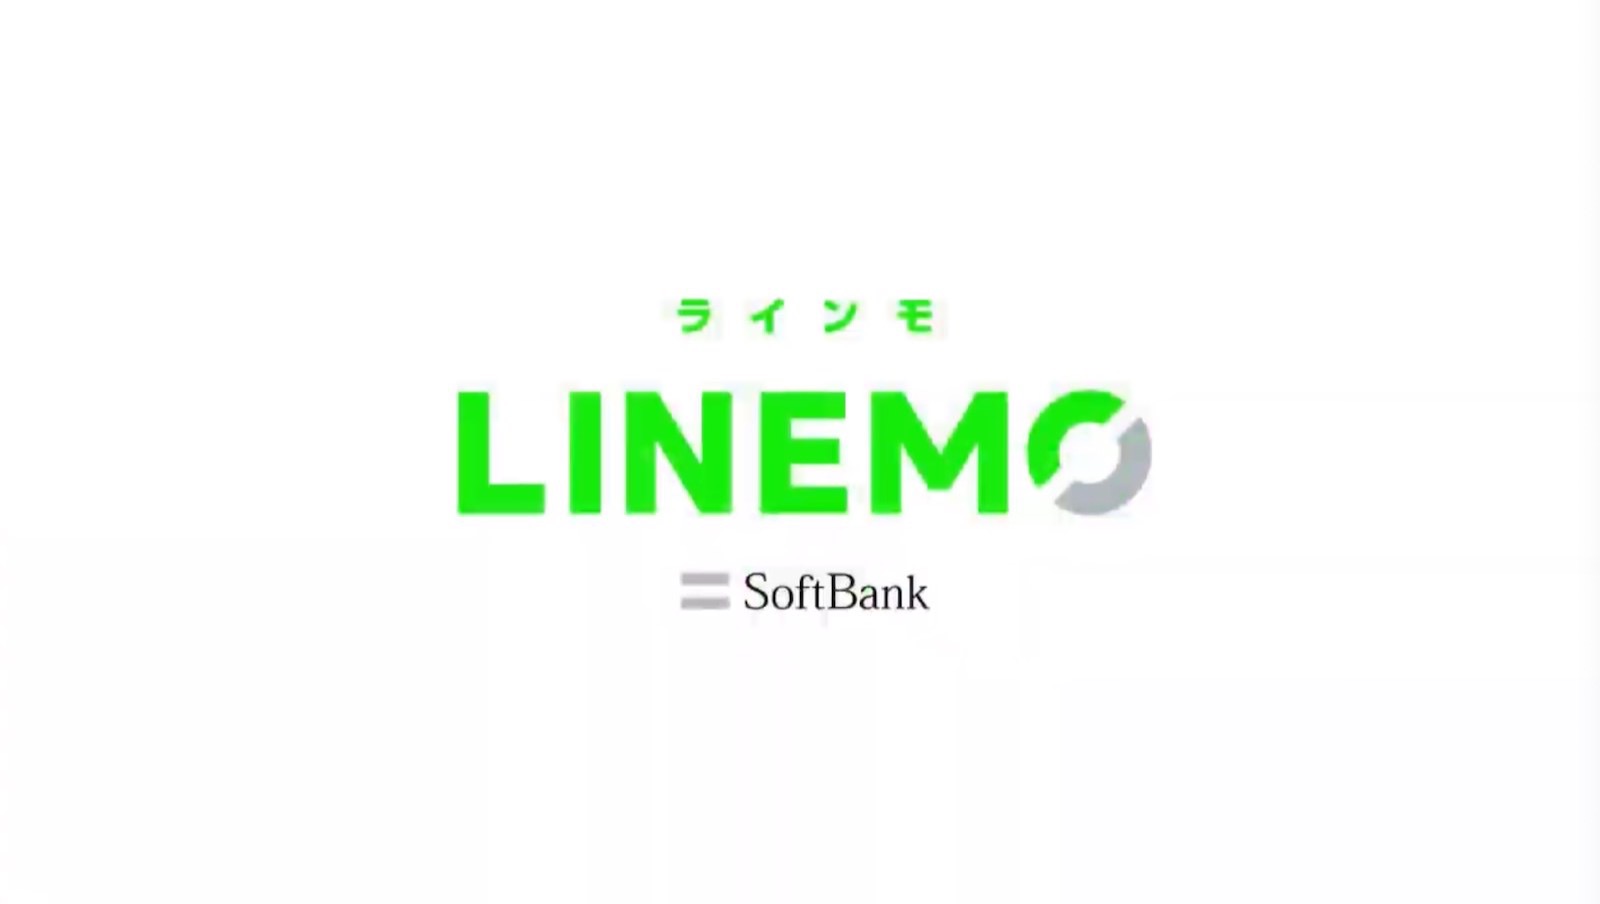 Linemo official name